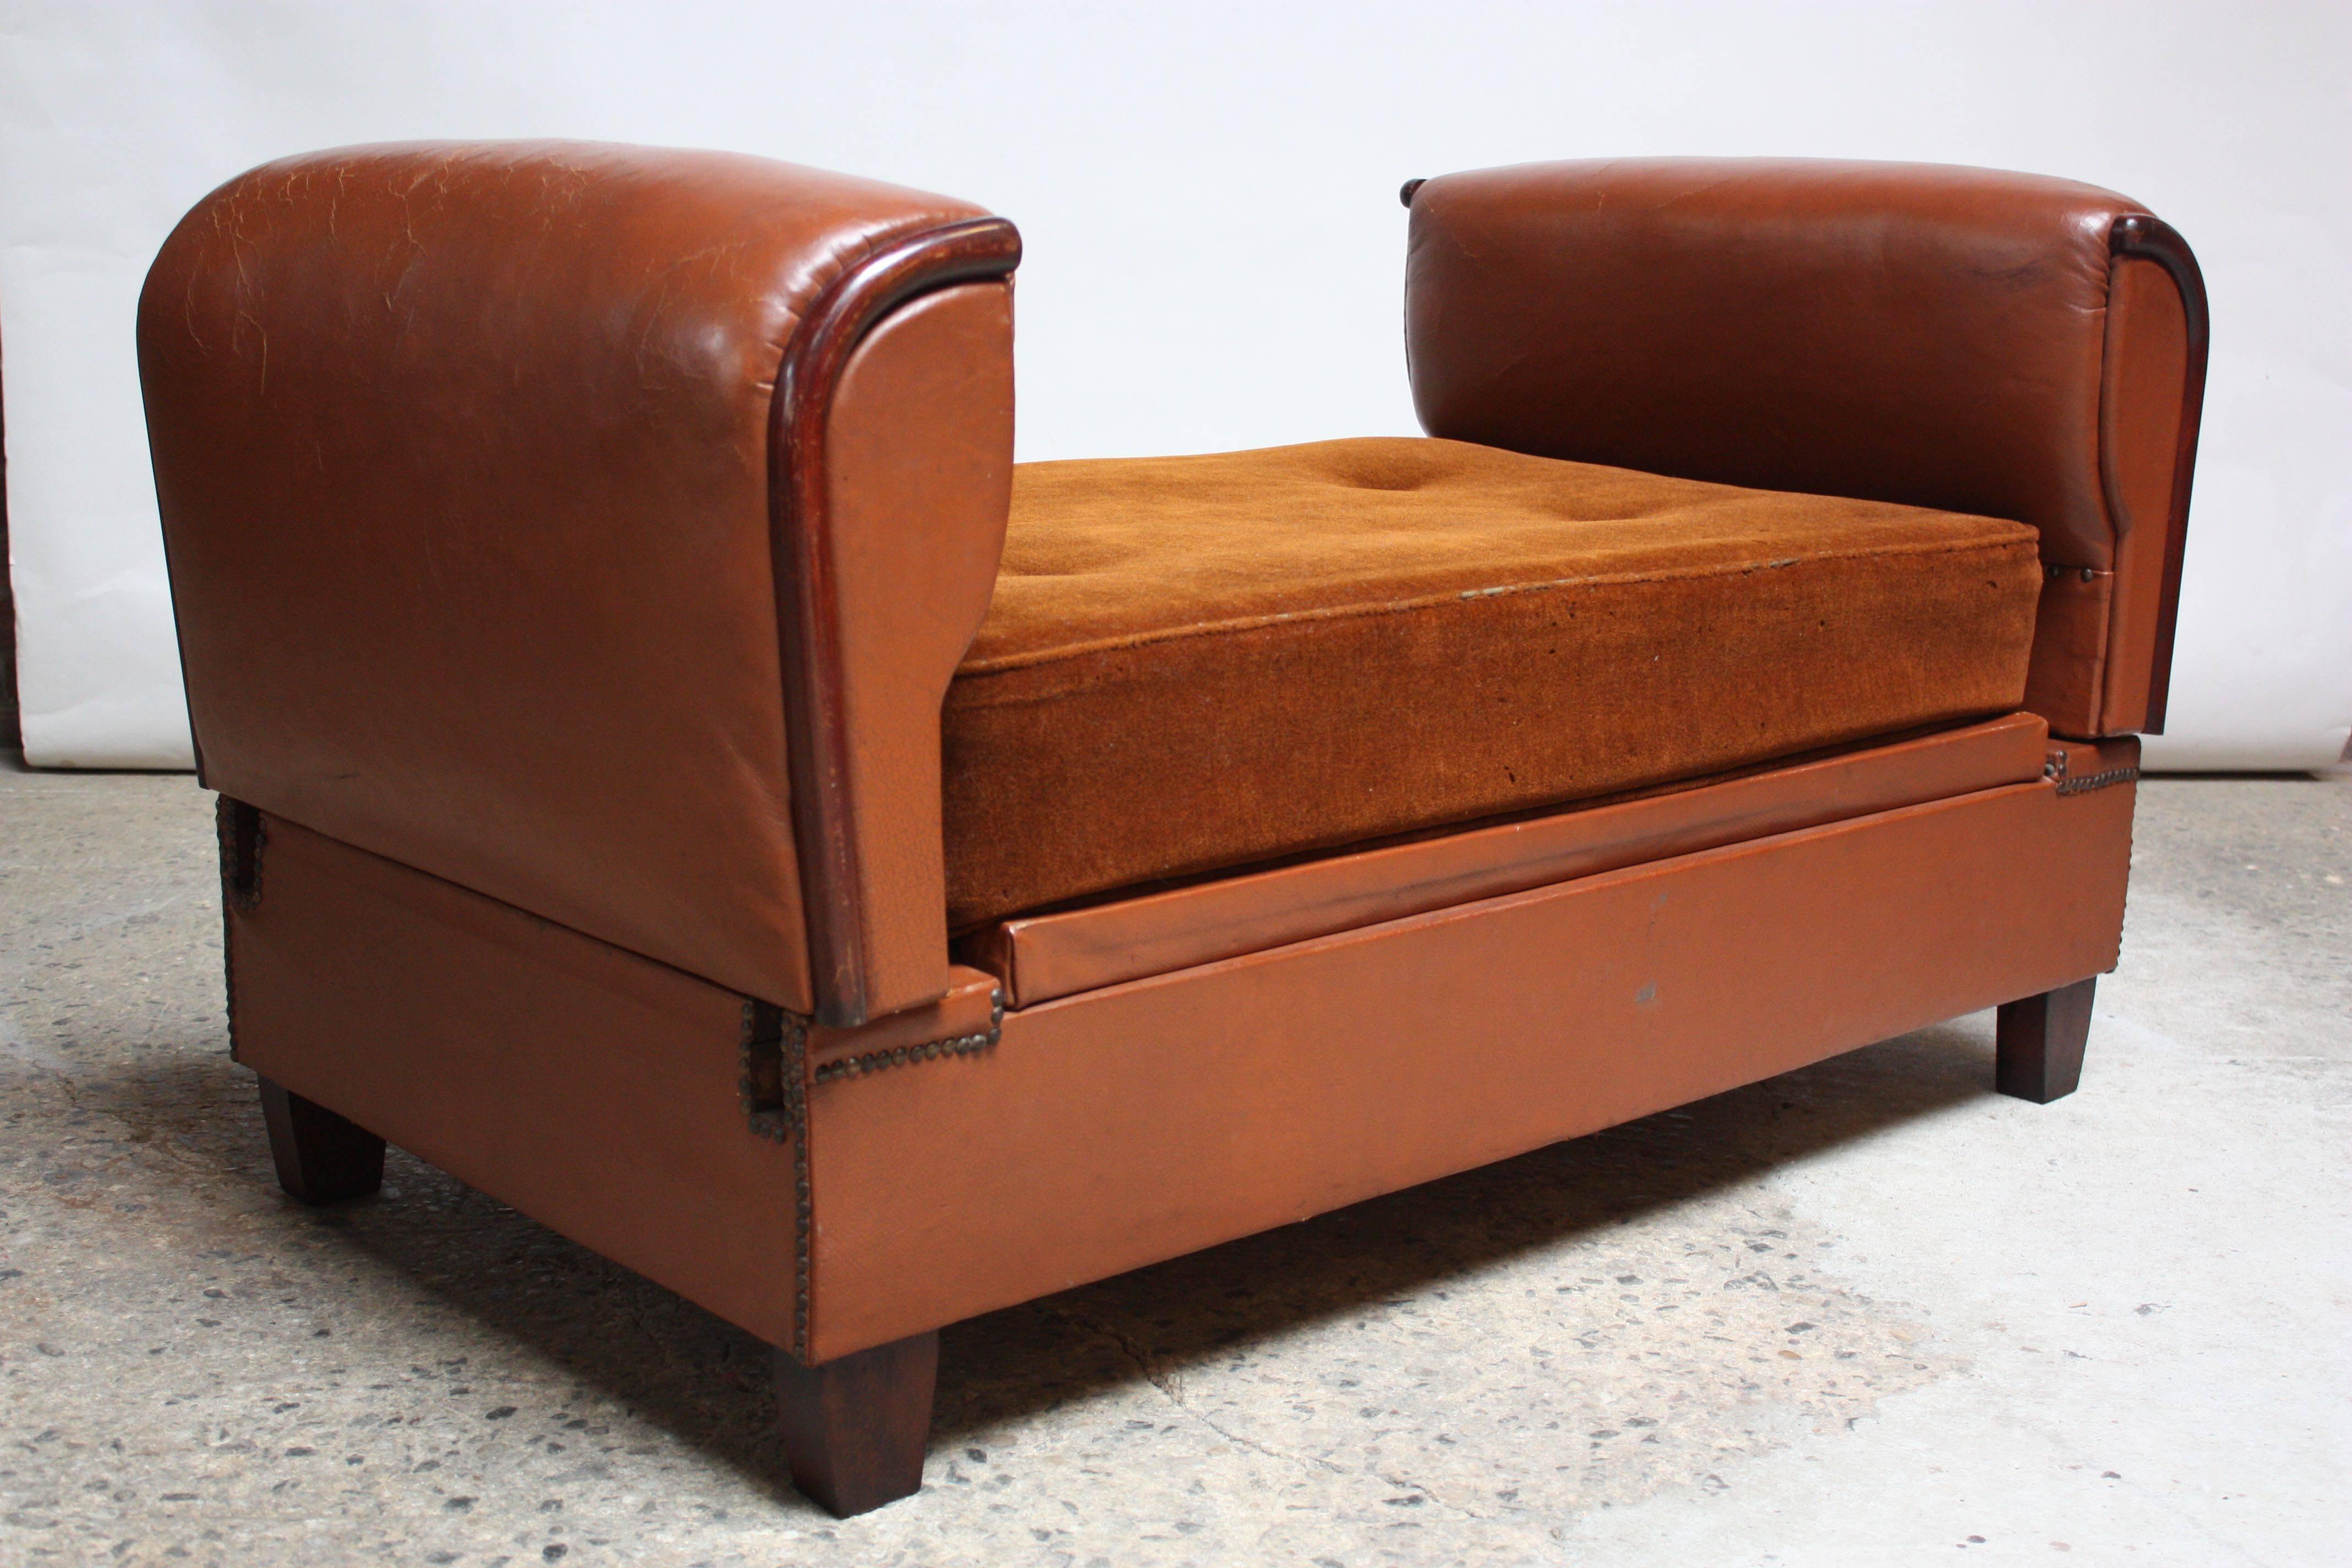 This versatile French deco daybed (circa late 1930s) can be converted from a bench to daybed, when the arms are removed and reoriented into the appropriate frame fittings. The stained mahogany trim complements both the rust-colored mohair cushion